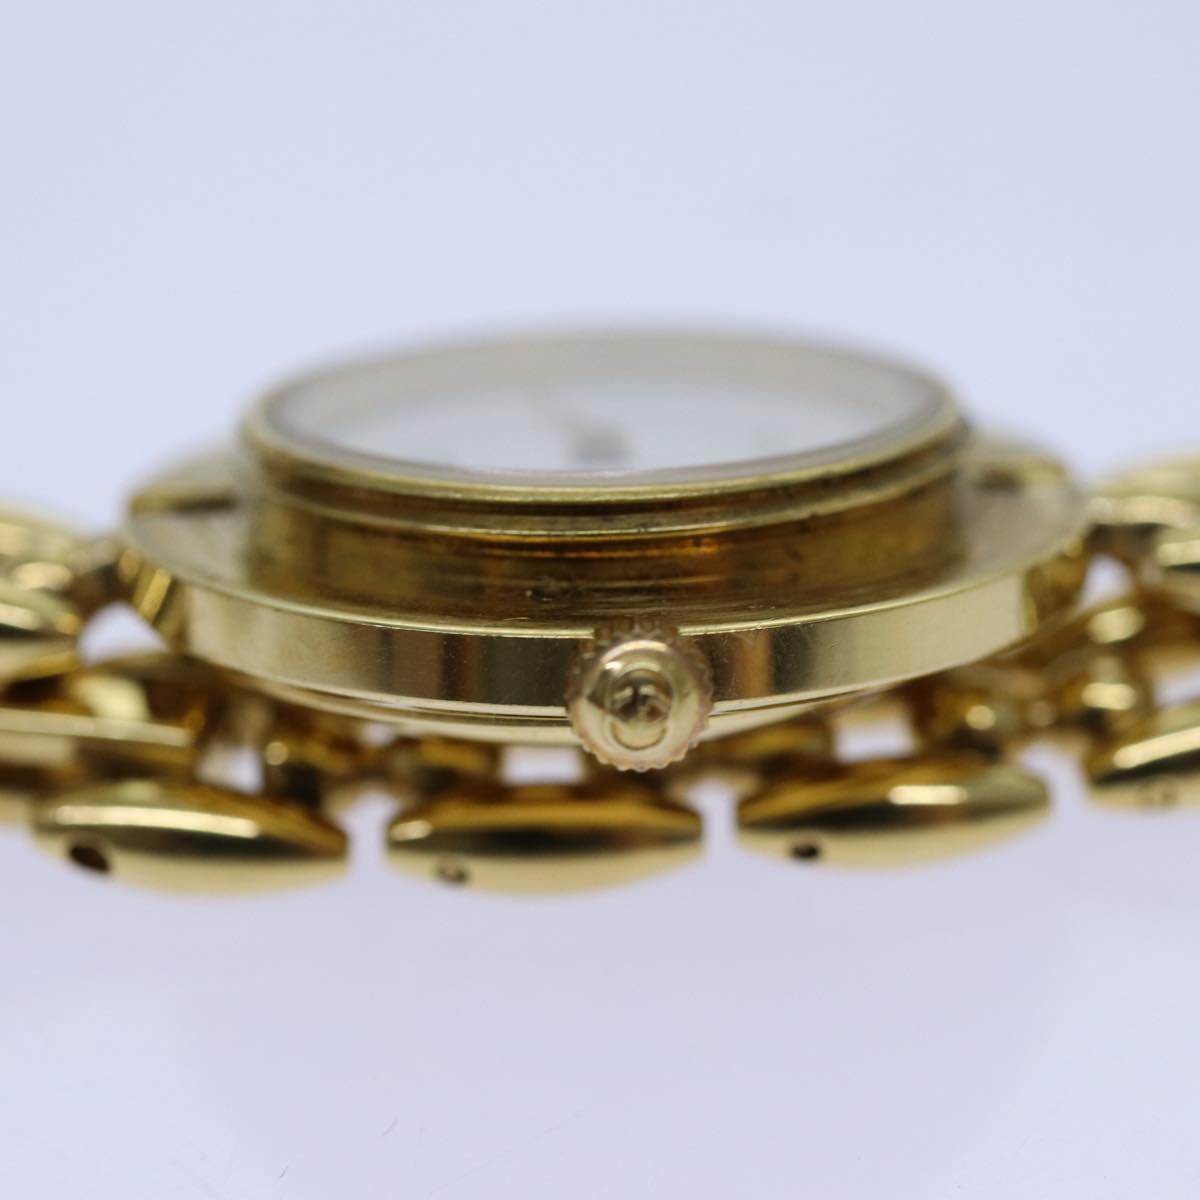 GUCCI Watches metal Gold Auth am6083